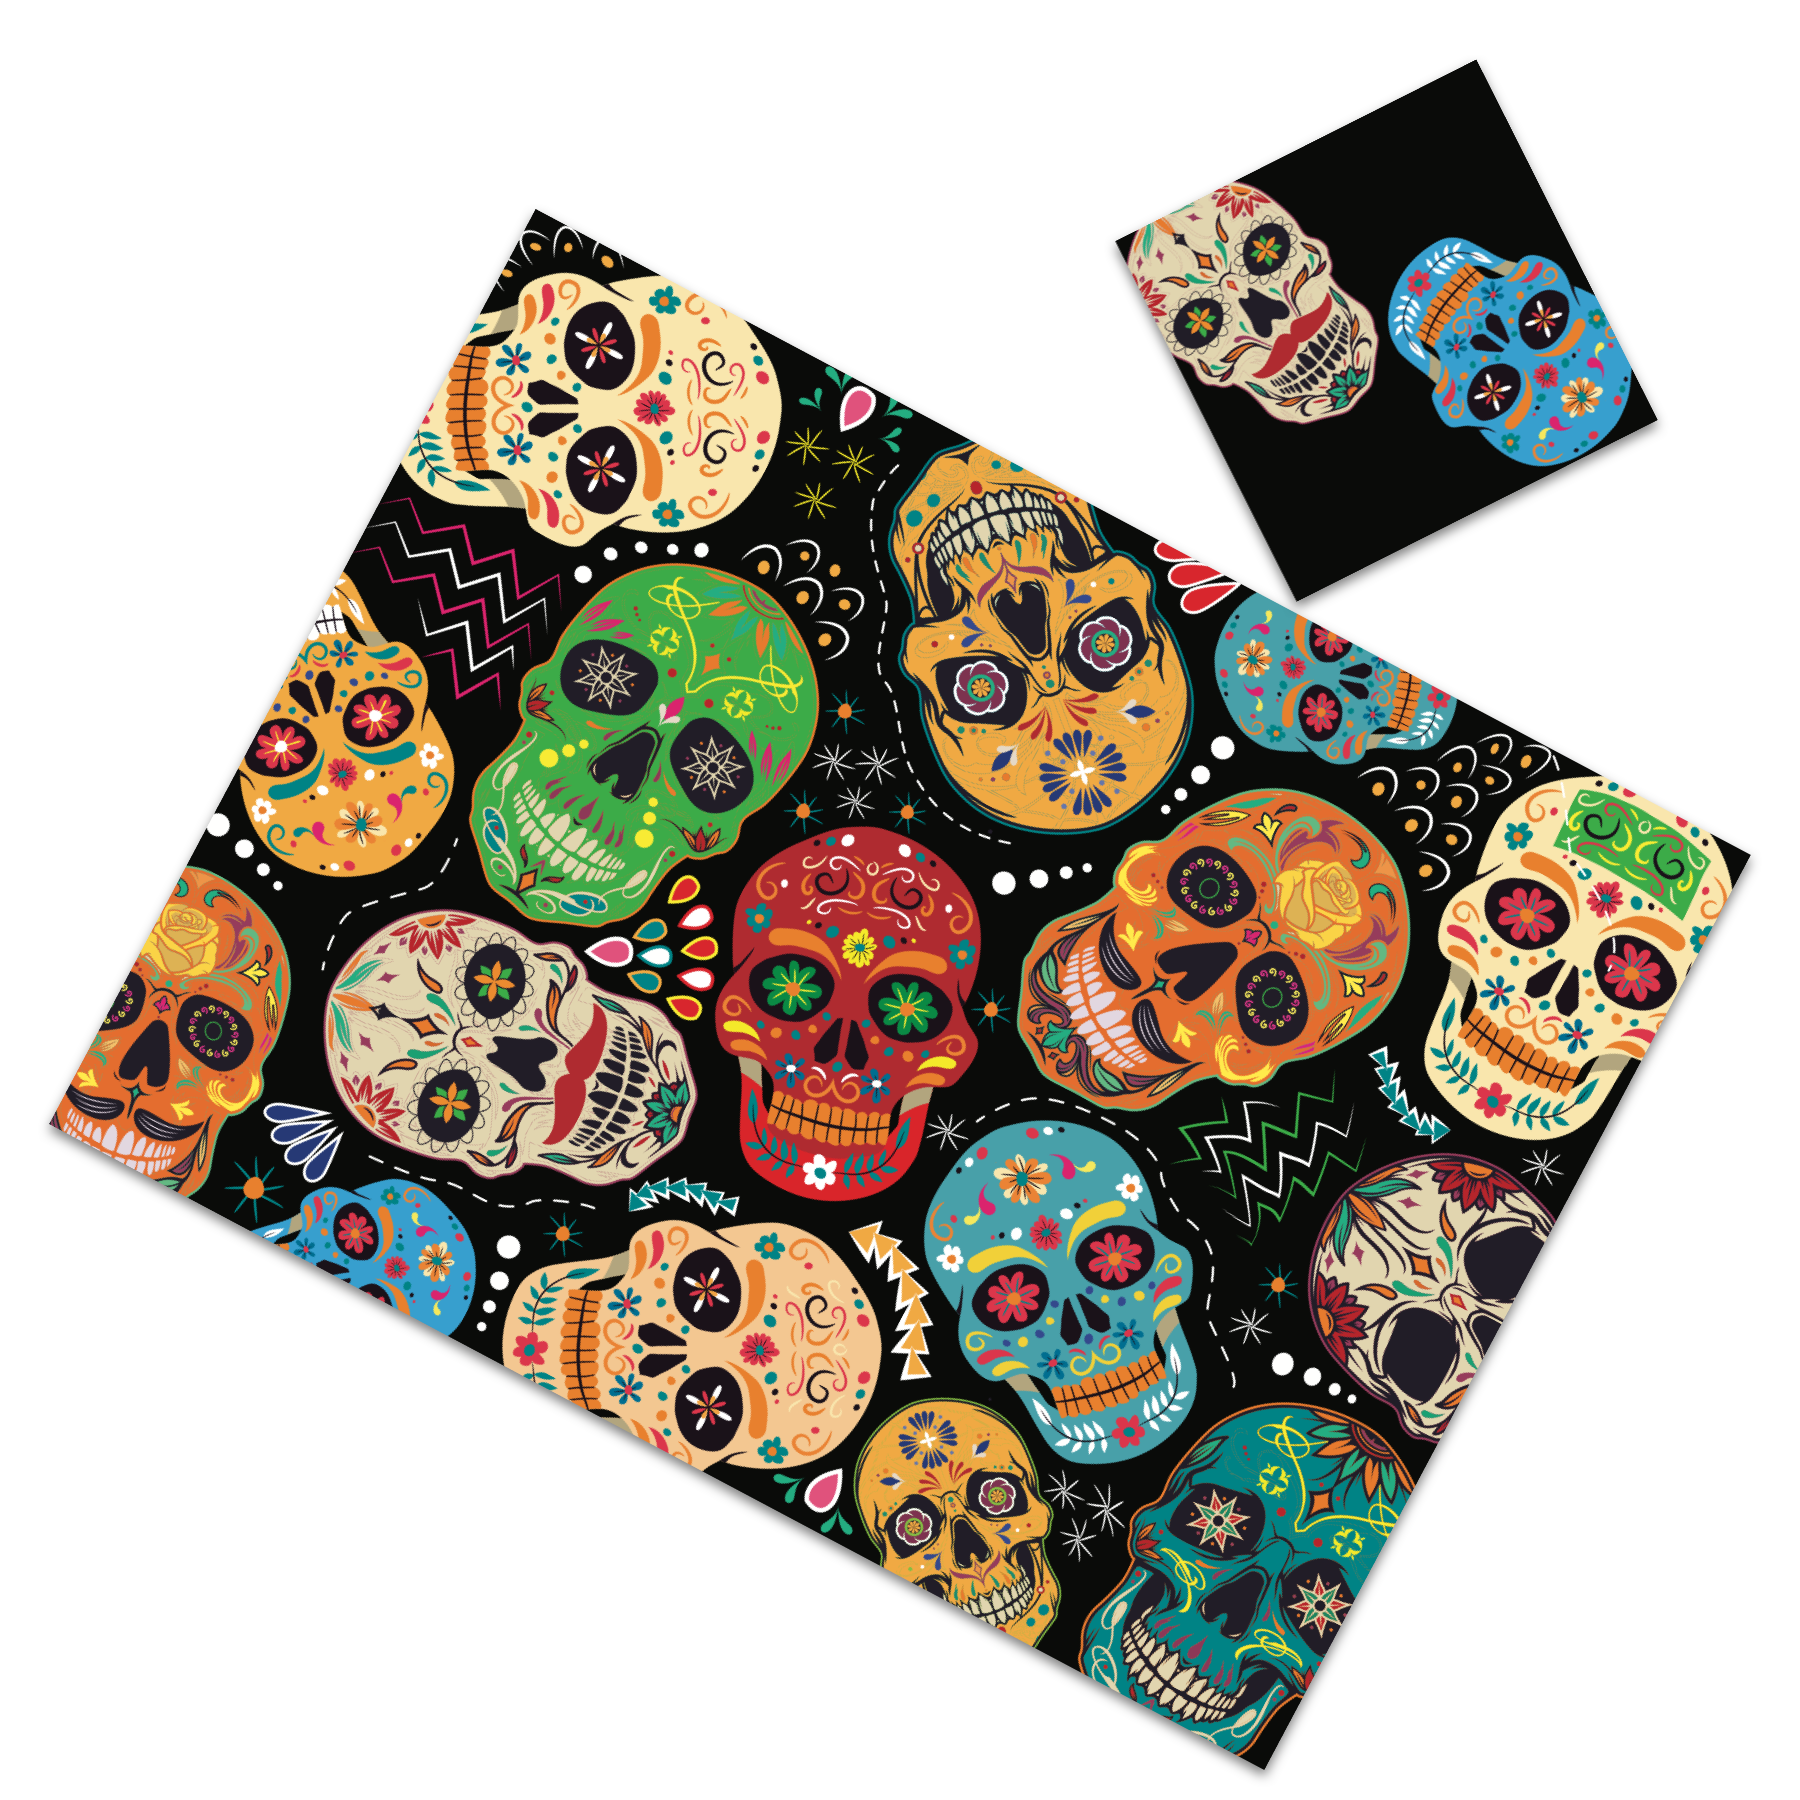 Celebrate Halloween the Mexican way  Disposable rectangular paper place-mats with matching coasters.  Printed on heavy glossy card stock.   Set of 12  Size 16.5" x 12.5"